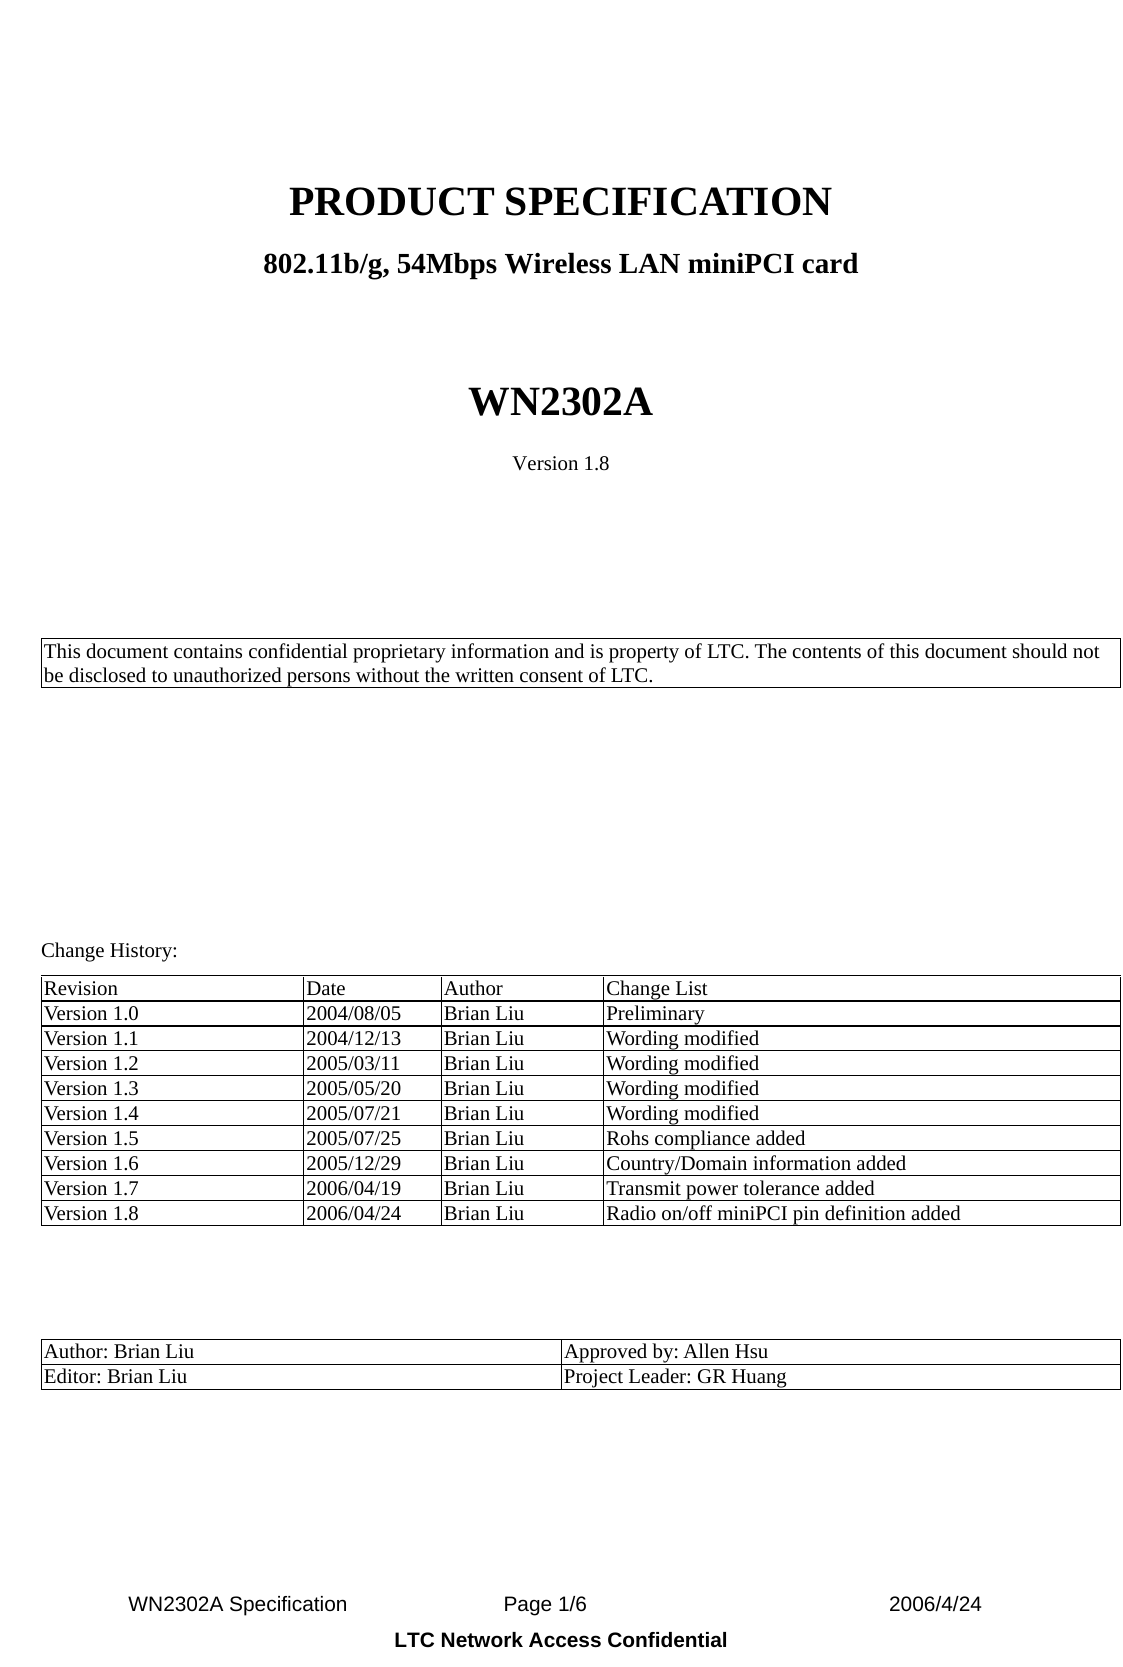  WN2302A Specification               Page 1/6                             2006/4/24 LTC Network Access Confidential  PRODUCT SPECIFICATION 802.11b/g, 54Mbps Wireless LAN miniPCI card  WN2302A Version 1.8     This document contains confidential proprietary information and is property of LTC. The contents of this document should not be disclosed to unauthorized persons without the written consent of LTC.             Change History: Revision Date Author Change List Version 1.0  2004/08/05  Brian Liu  Preliminary Version 1.1  2004/12/13  Brian Liu  Wording modified Version 1.2  2005/03/11  Brian Liu  Wording modified Version 1.3  2005/05/20  Brian Liu  Wording modified Version 1.4  2005/07/21  Brian Liu  Wording modified Version 1.5  2005/07/25  Brian Liu  Rohs compliance added Version 1.6  2005/12/29  Brian Liu  Country/Domain information added Version 1.7  2006/04/19  Brian Liu  Transmit power tolerance added Version 1.8  2006/04/24  Brian Liu  Radio on/off miniPCI pin definition added    Author: Brian Liu  Approved by: Allen Hsu Editor: Brian Liu  Project Leader: GR Huang  